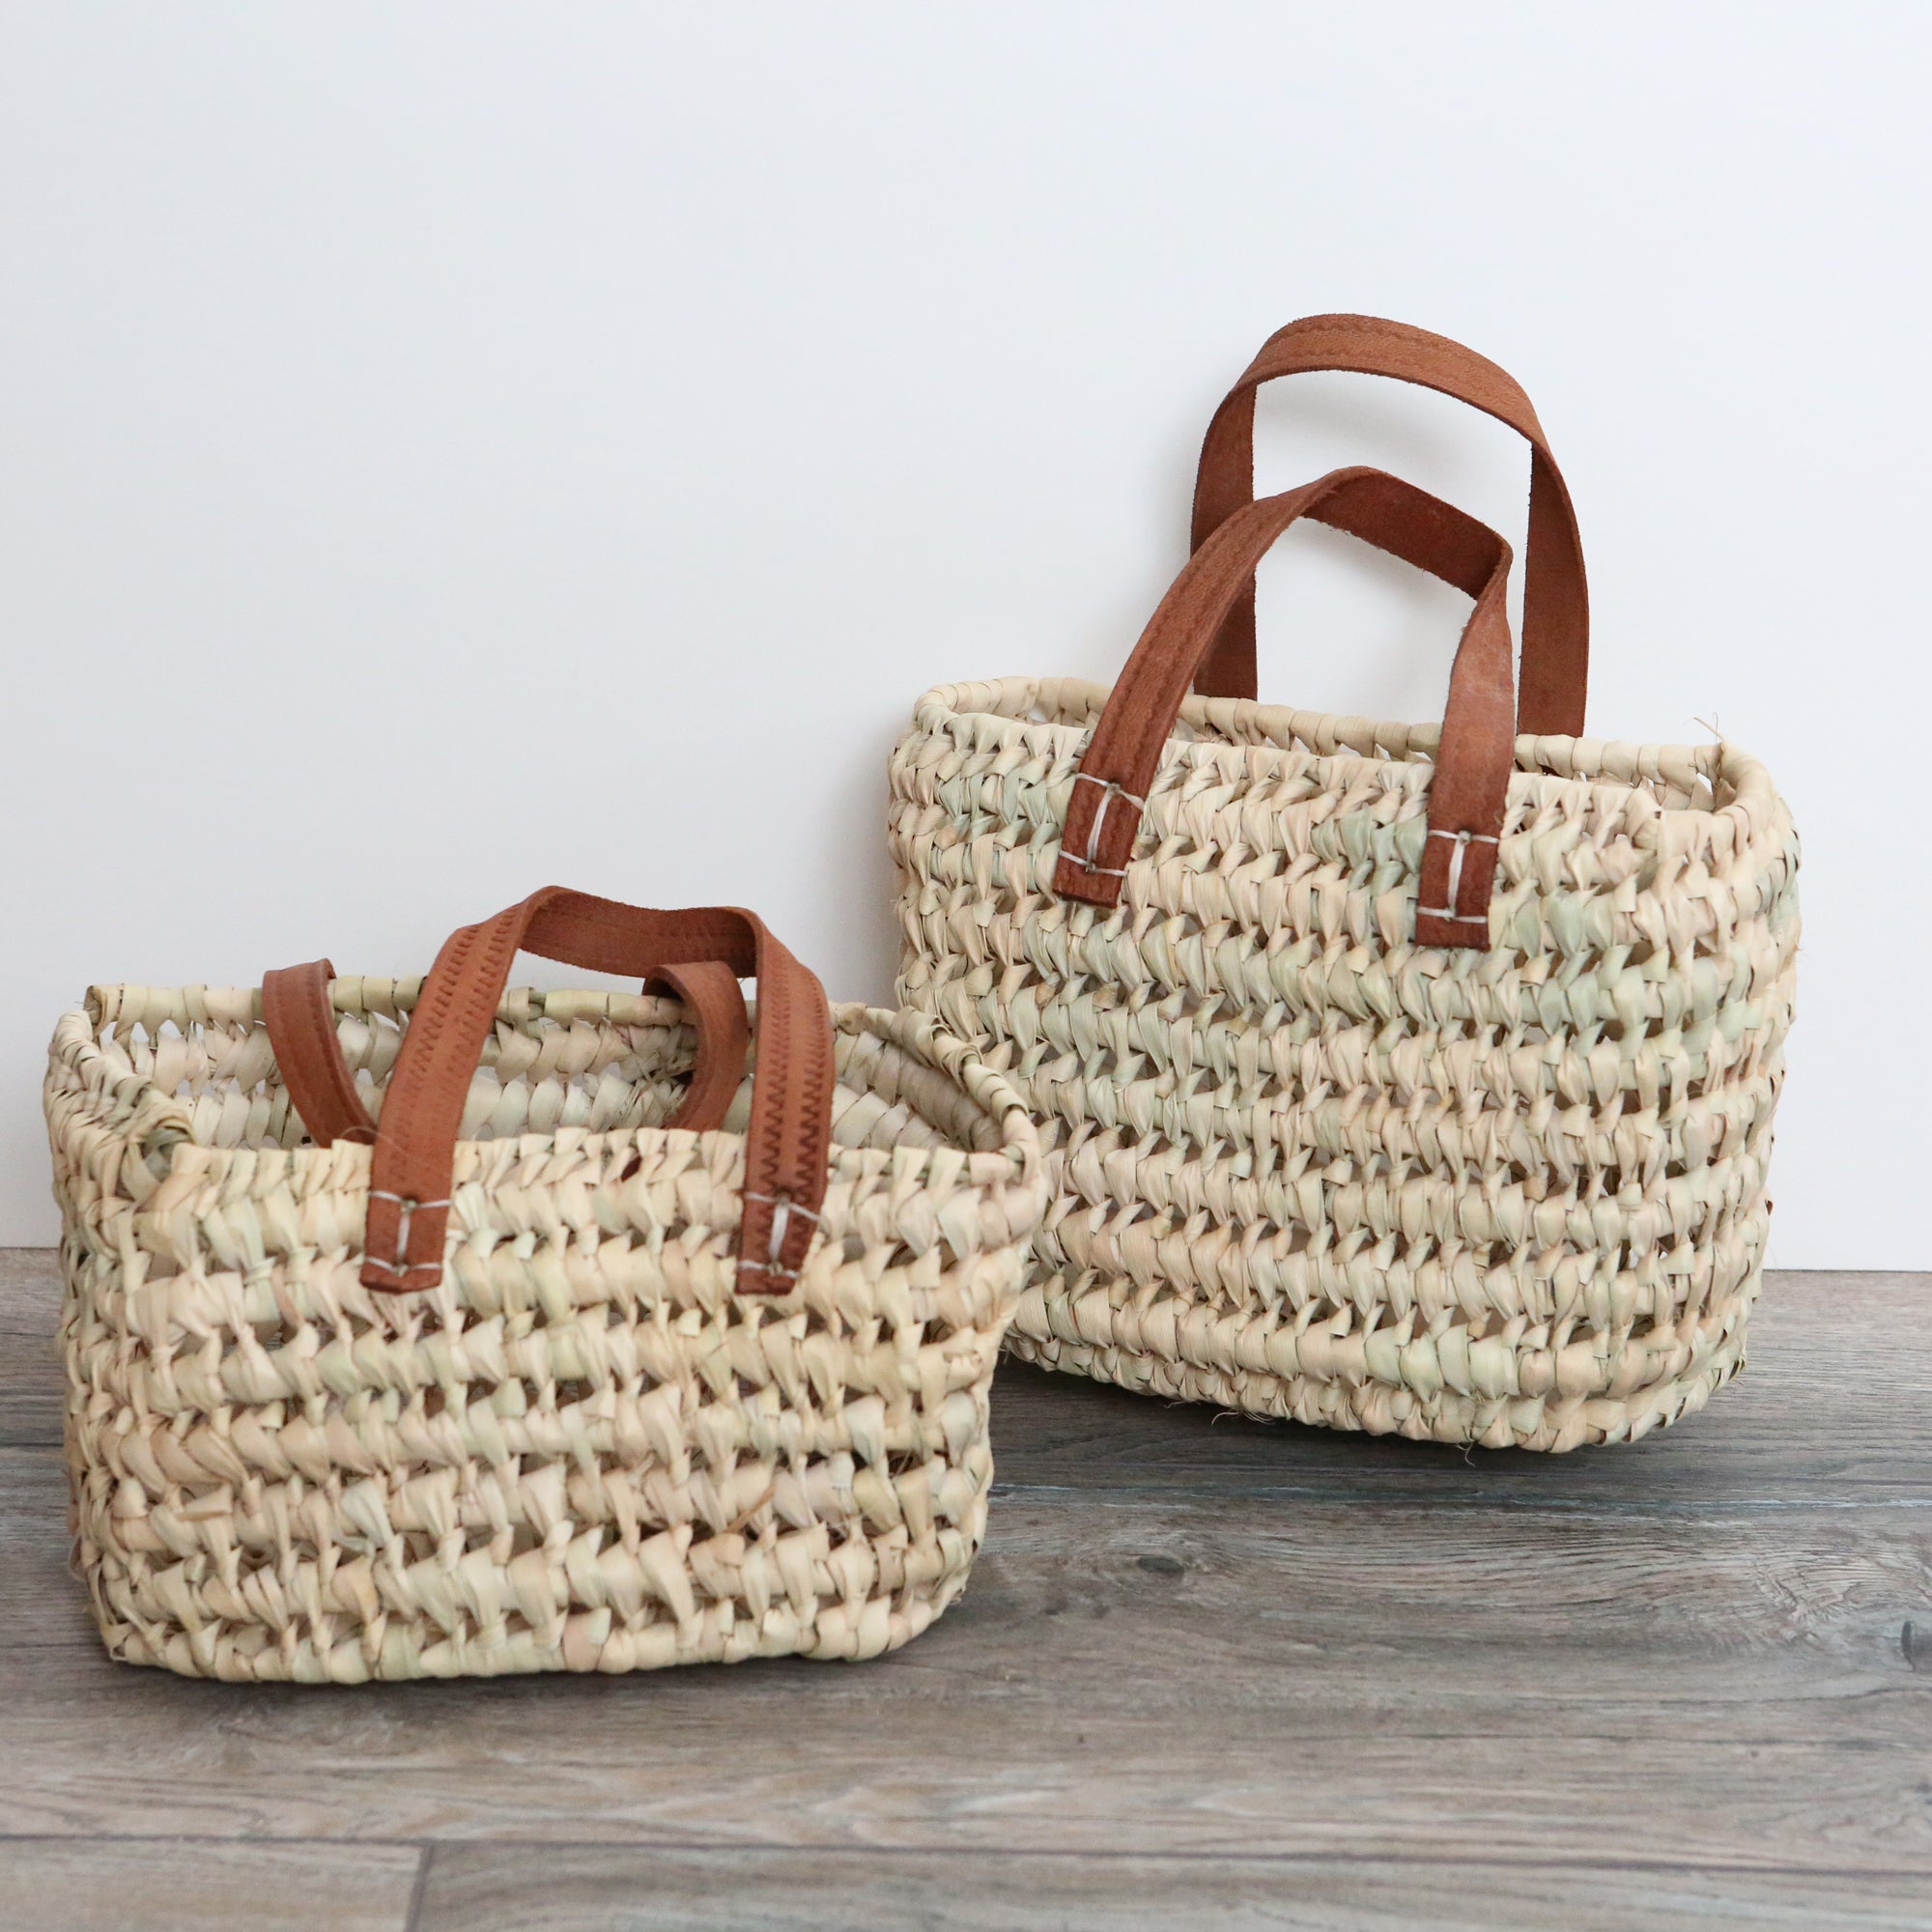 French Basket, straw bag with leather handles, beach bag, straw bag, beach  bag, basket bag, shopping basket, wicker basket with handle, straw market